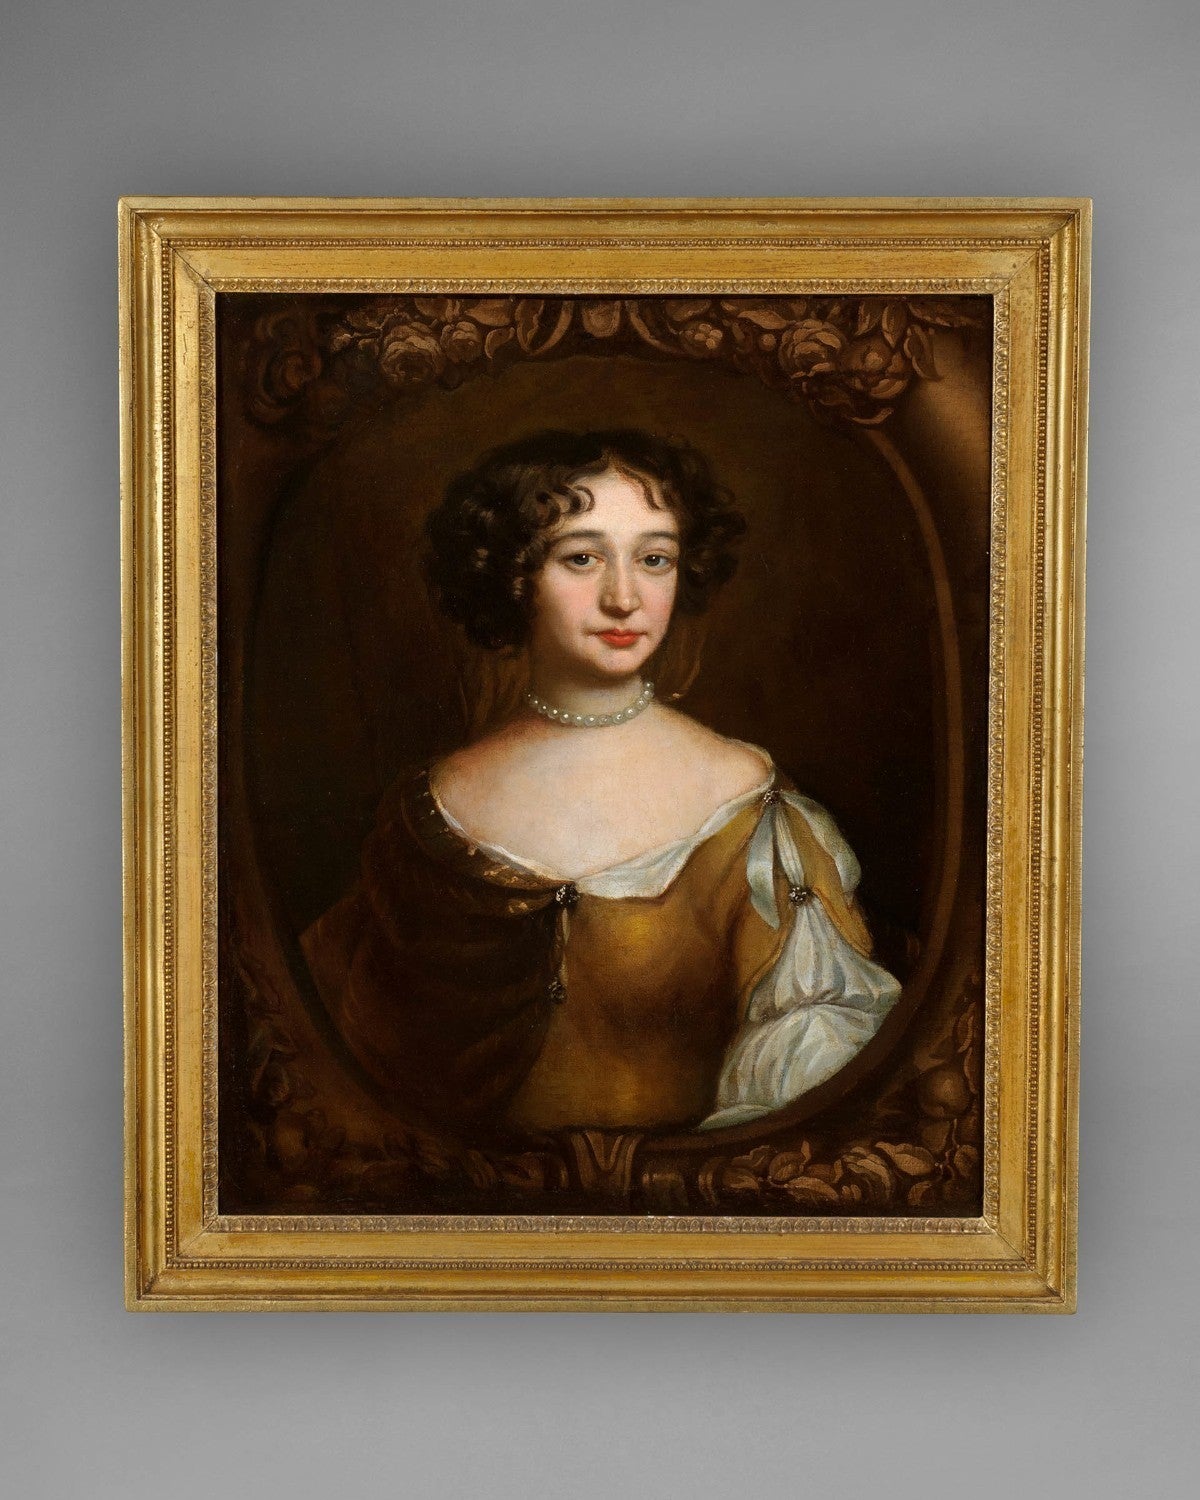 A very good late 17th-early 18th century oil on canvas portrait of a lady, believed to be the sister of “Lady Blake” (See 399S).The style and composition of this portrait is strikingly similar to many of those painted by Sir Peter Lely, the Court